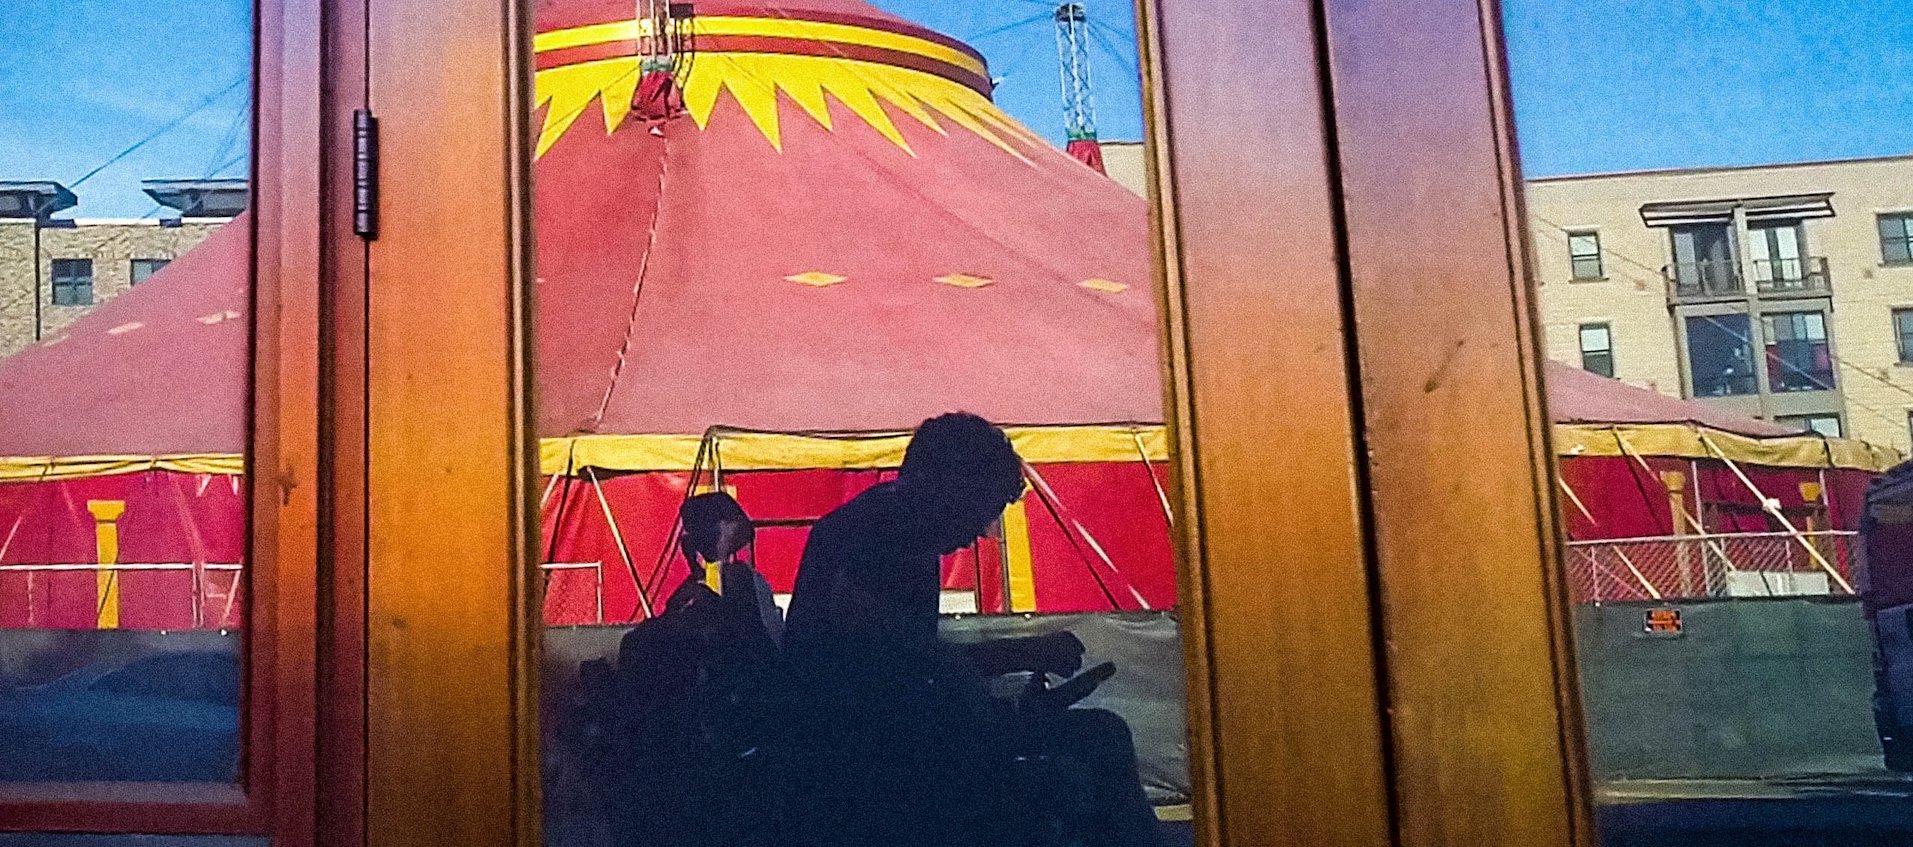 Still from the film I Didn't See You There. Filmmaker Reid Davenport, who is in a wheelchair, is seen in silhouette in the foreground, in the reflection of wood-framed glass doors. A red circus tent looms large behind him.